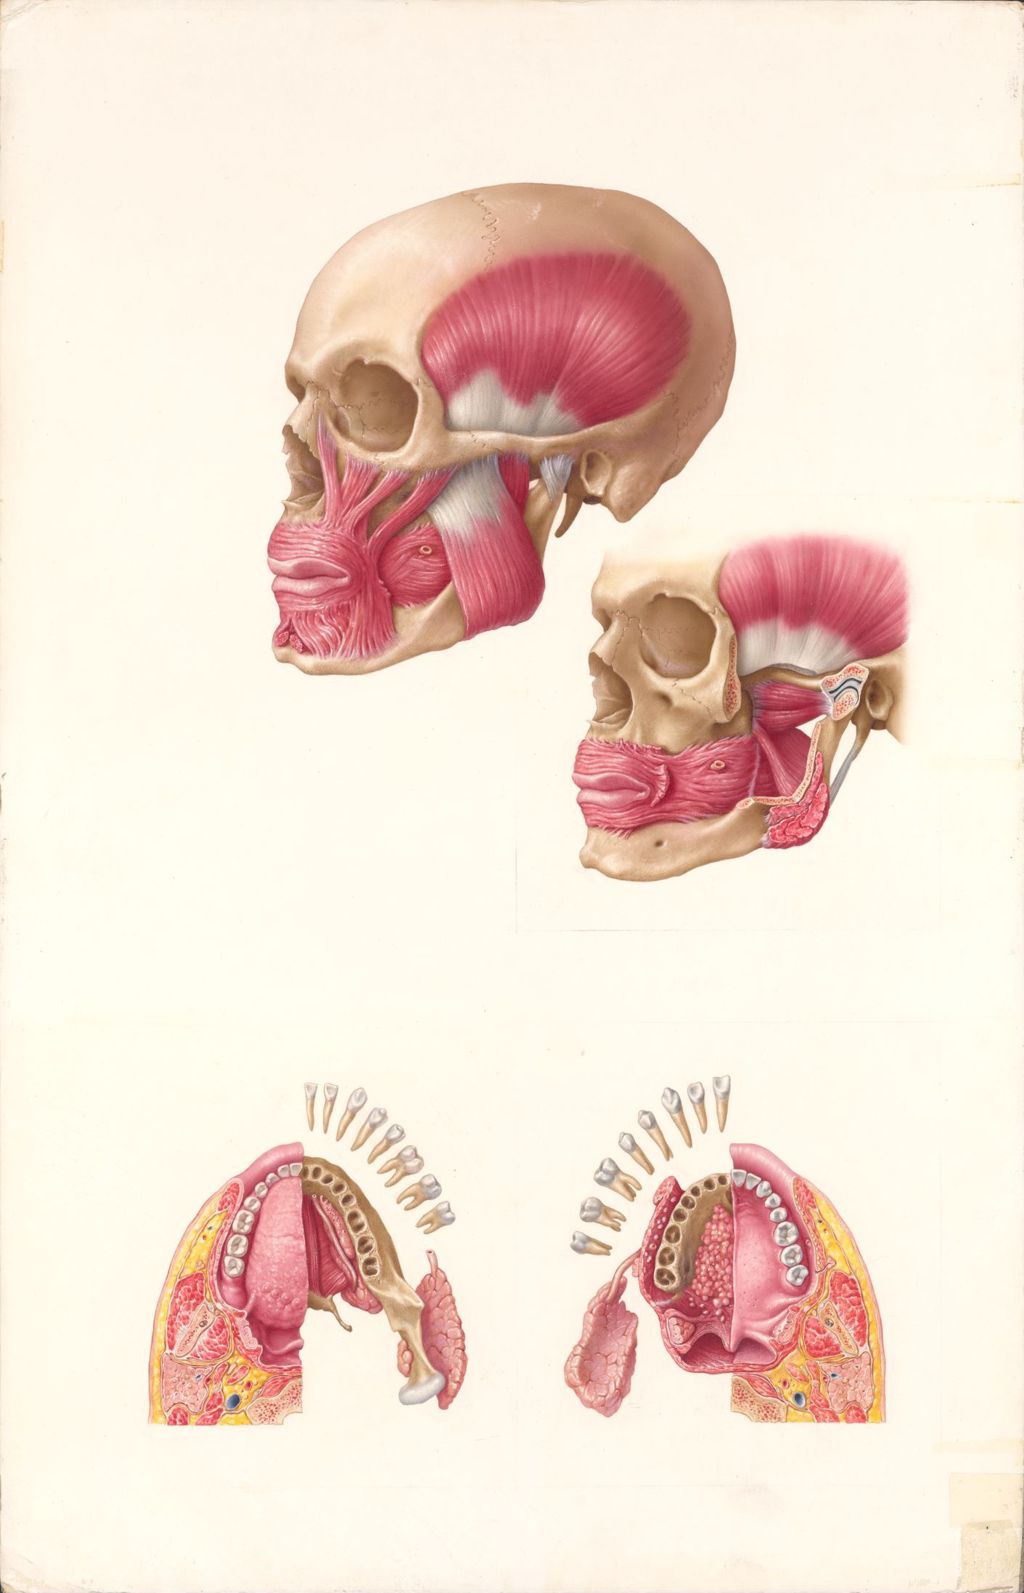 Miniature of Doctor-Patient Explanatory Atlas of Anatomy, The Normal Anatomy of the Mouth, Plate I, Muscles of the lips and mastication